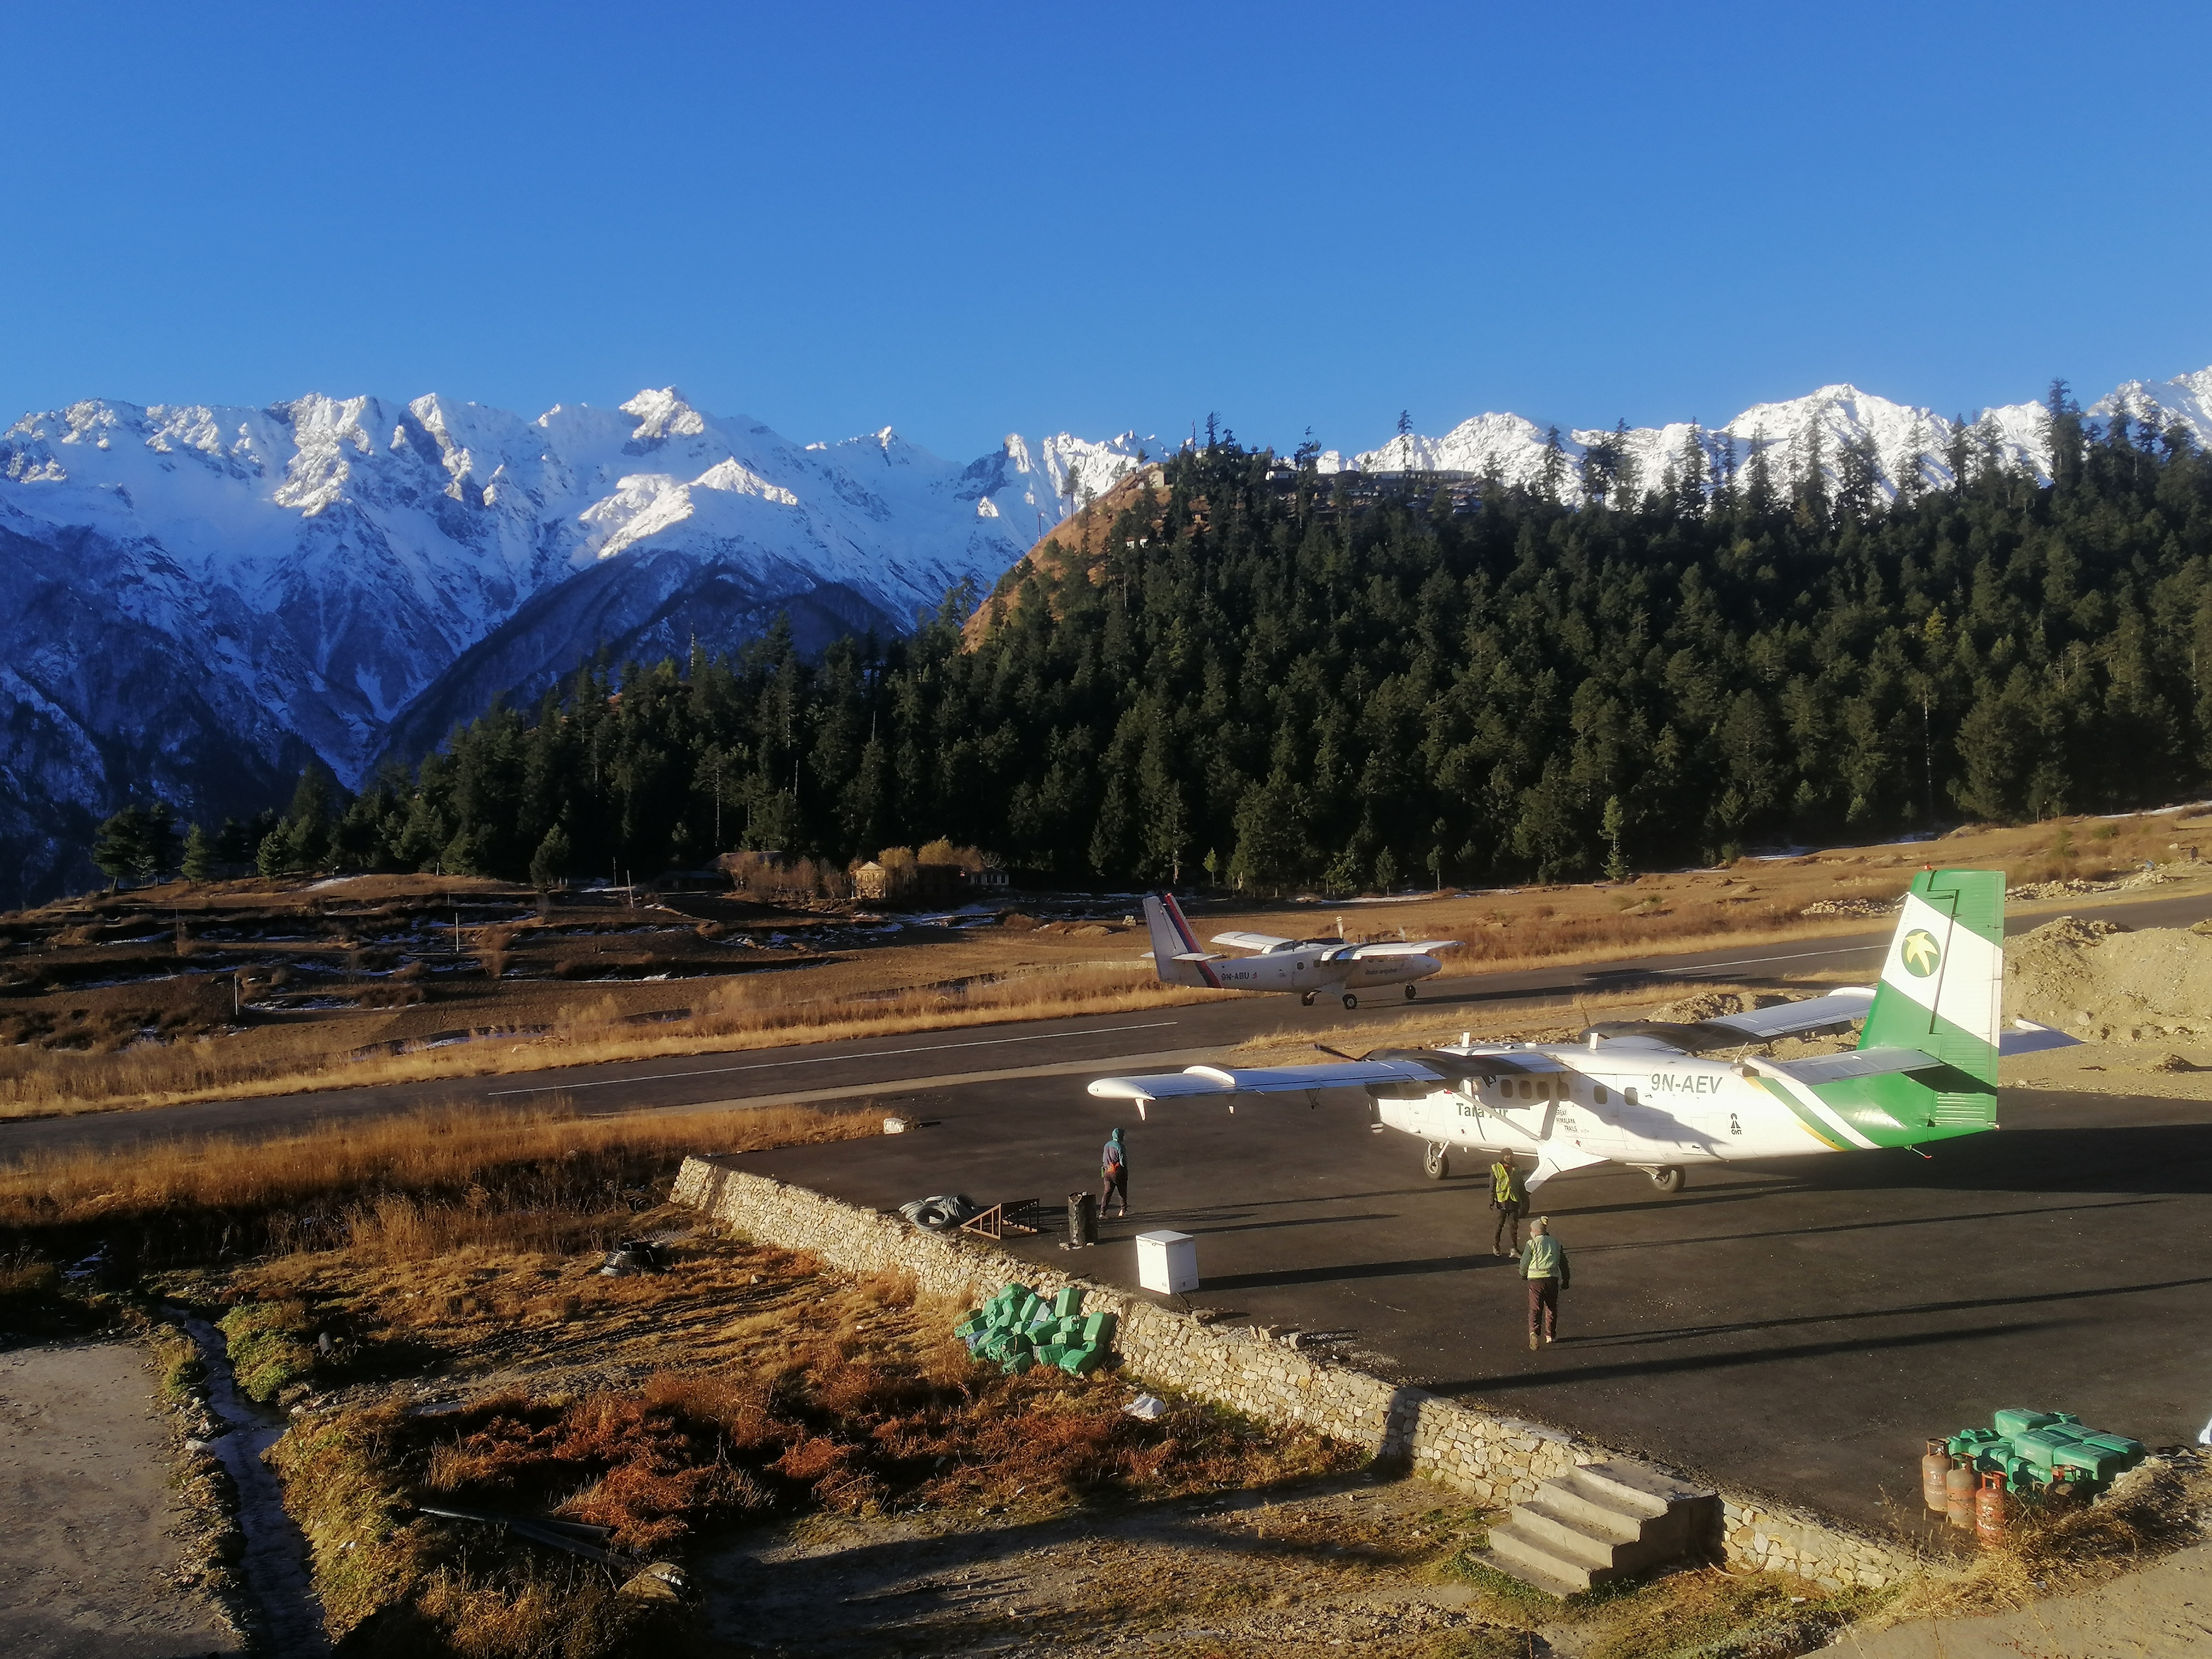 a-spellbinding-scene-of-simikot-airport-in-humla-district